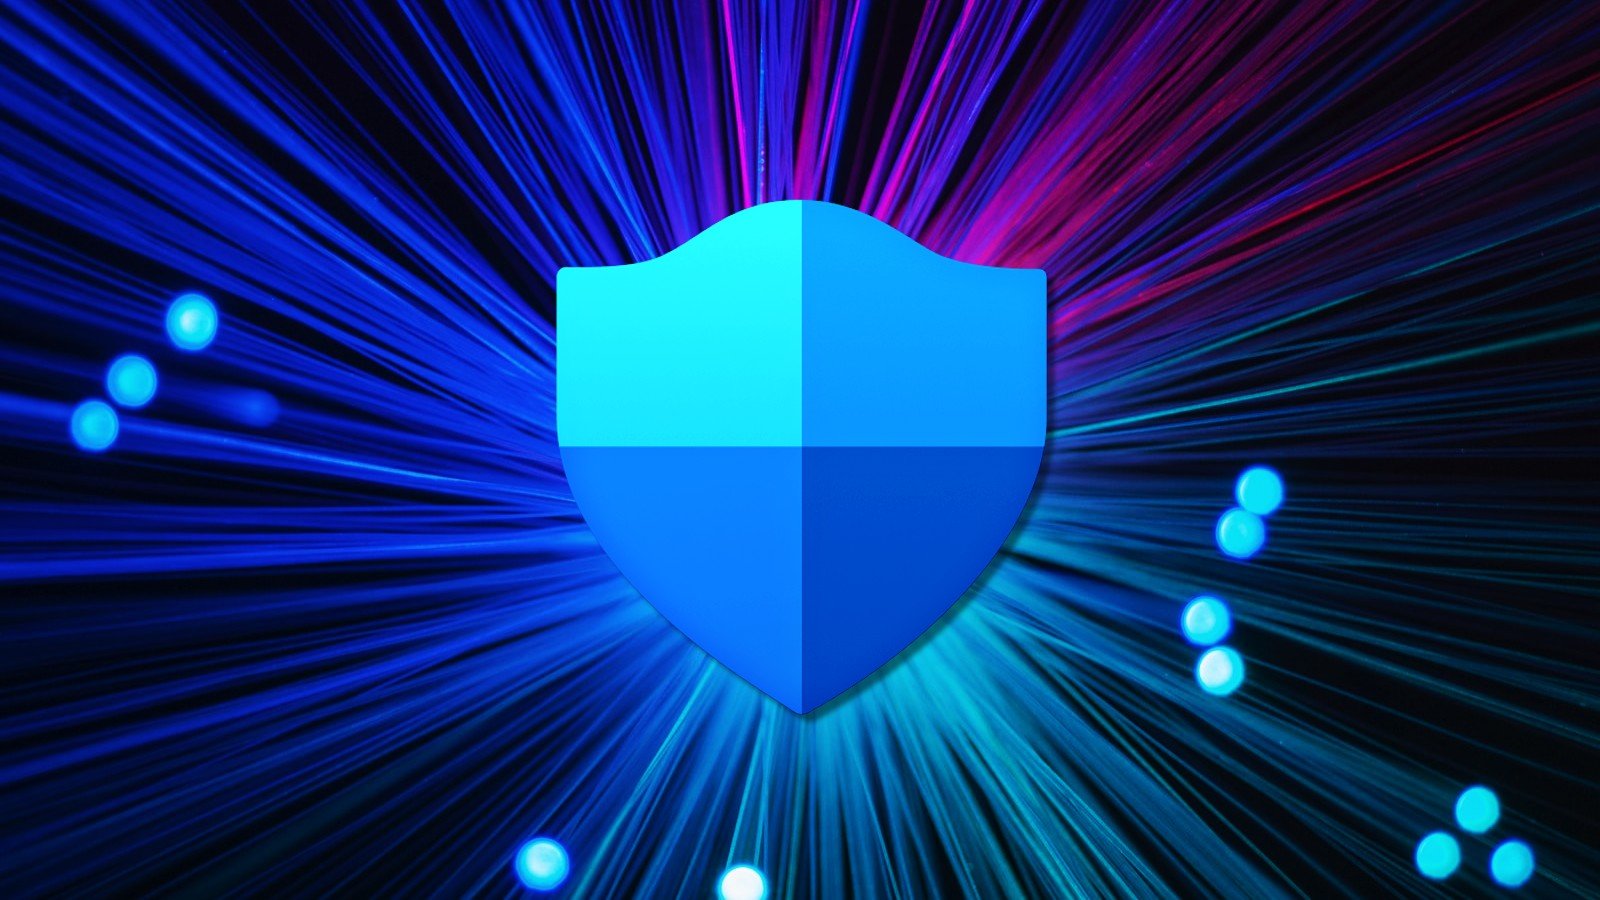 Microsoft Defender logo on a colorful background